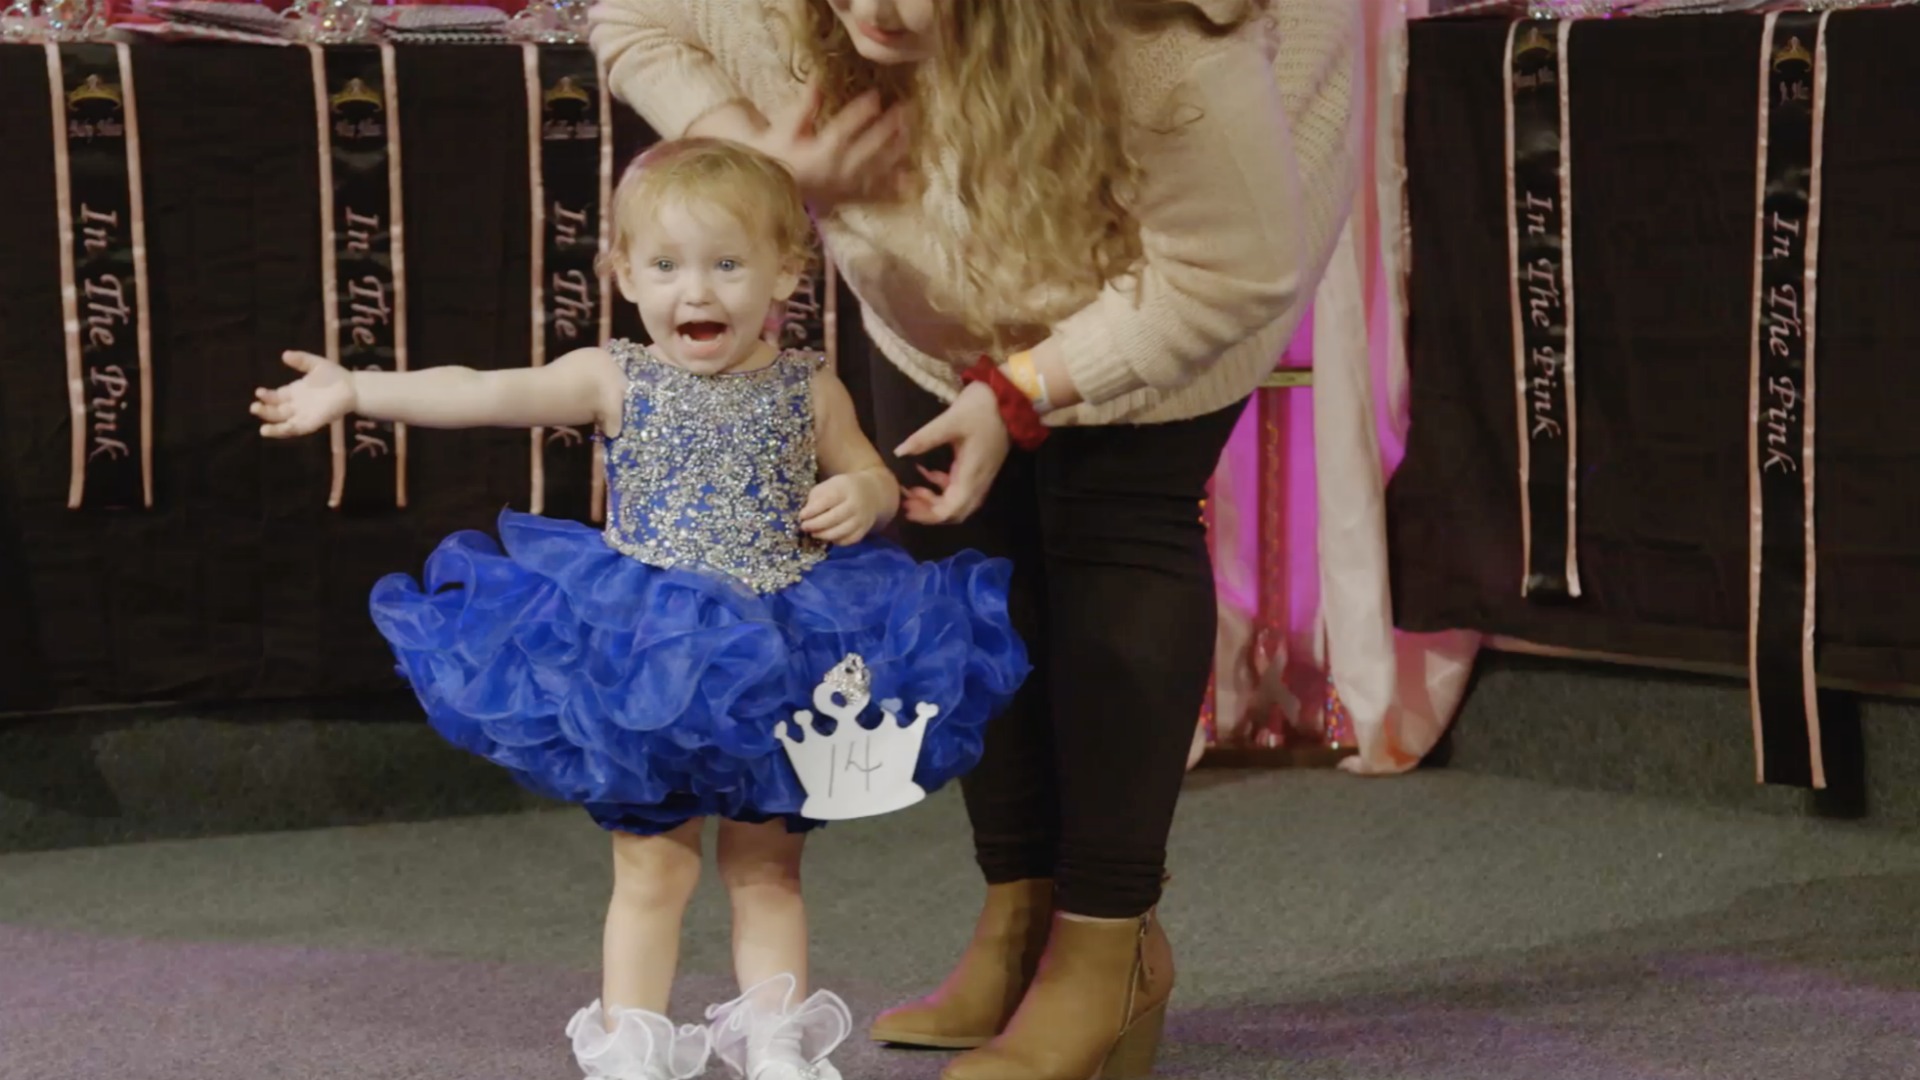 Watch Sneak Peek: Ella’s First Pageant! | Mama June: From Not to Hot Video Extras